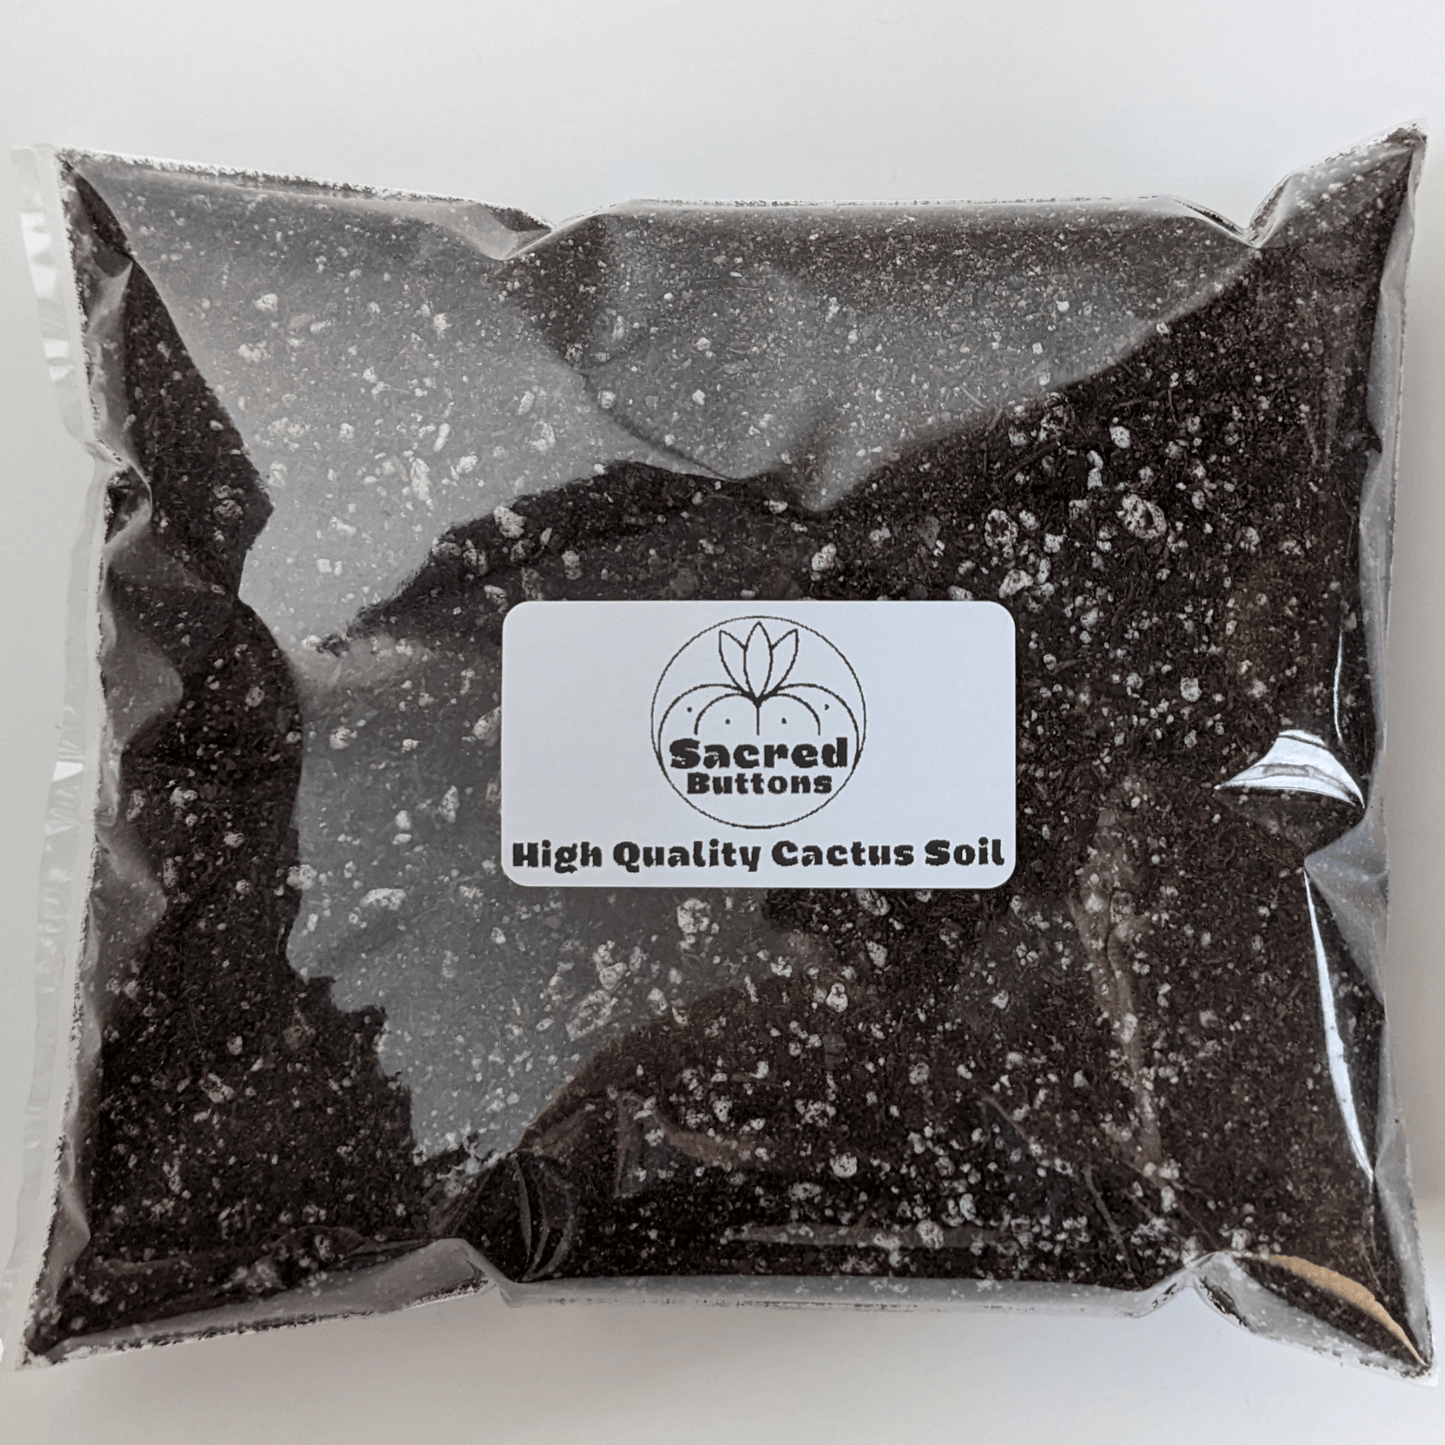 A bag of Sacred Buttons high-quality cactus soil.